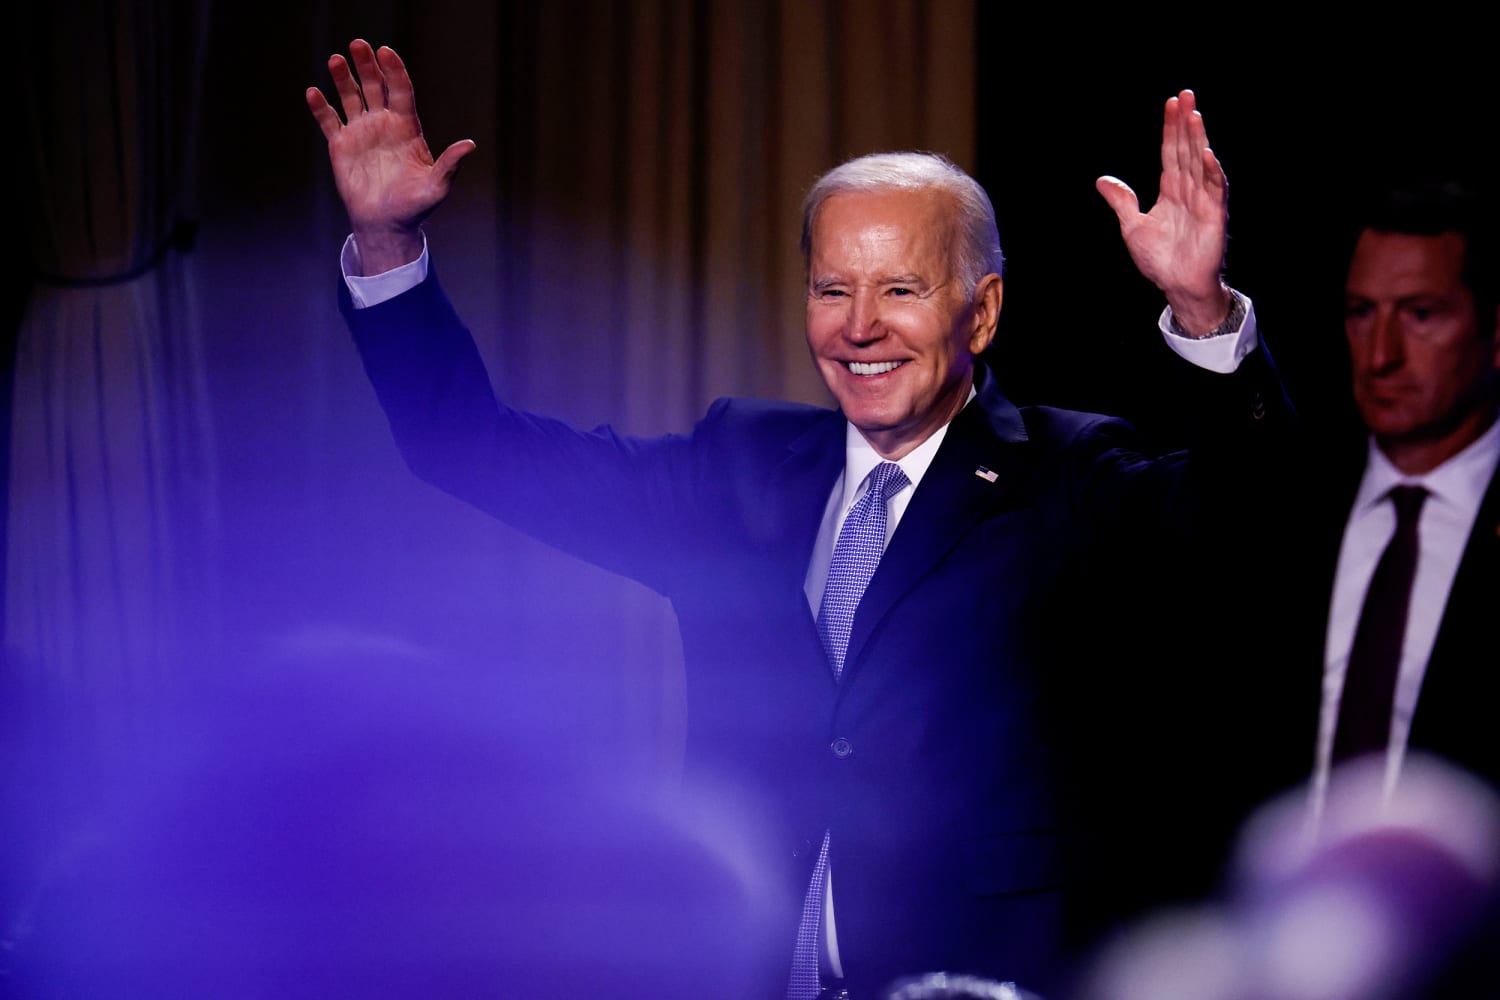 Biden to attend first 2024 rally in Pa. next week, as campaign plots flurry of fundraising